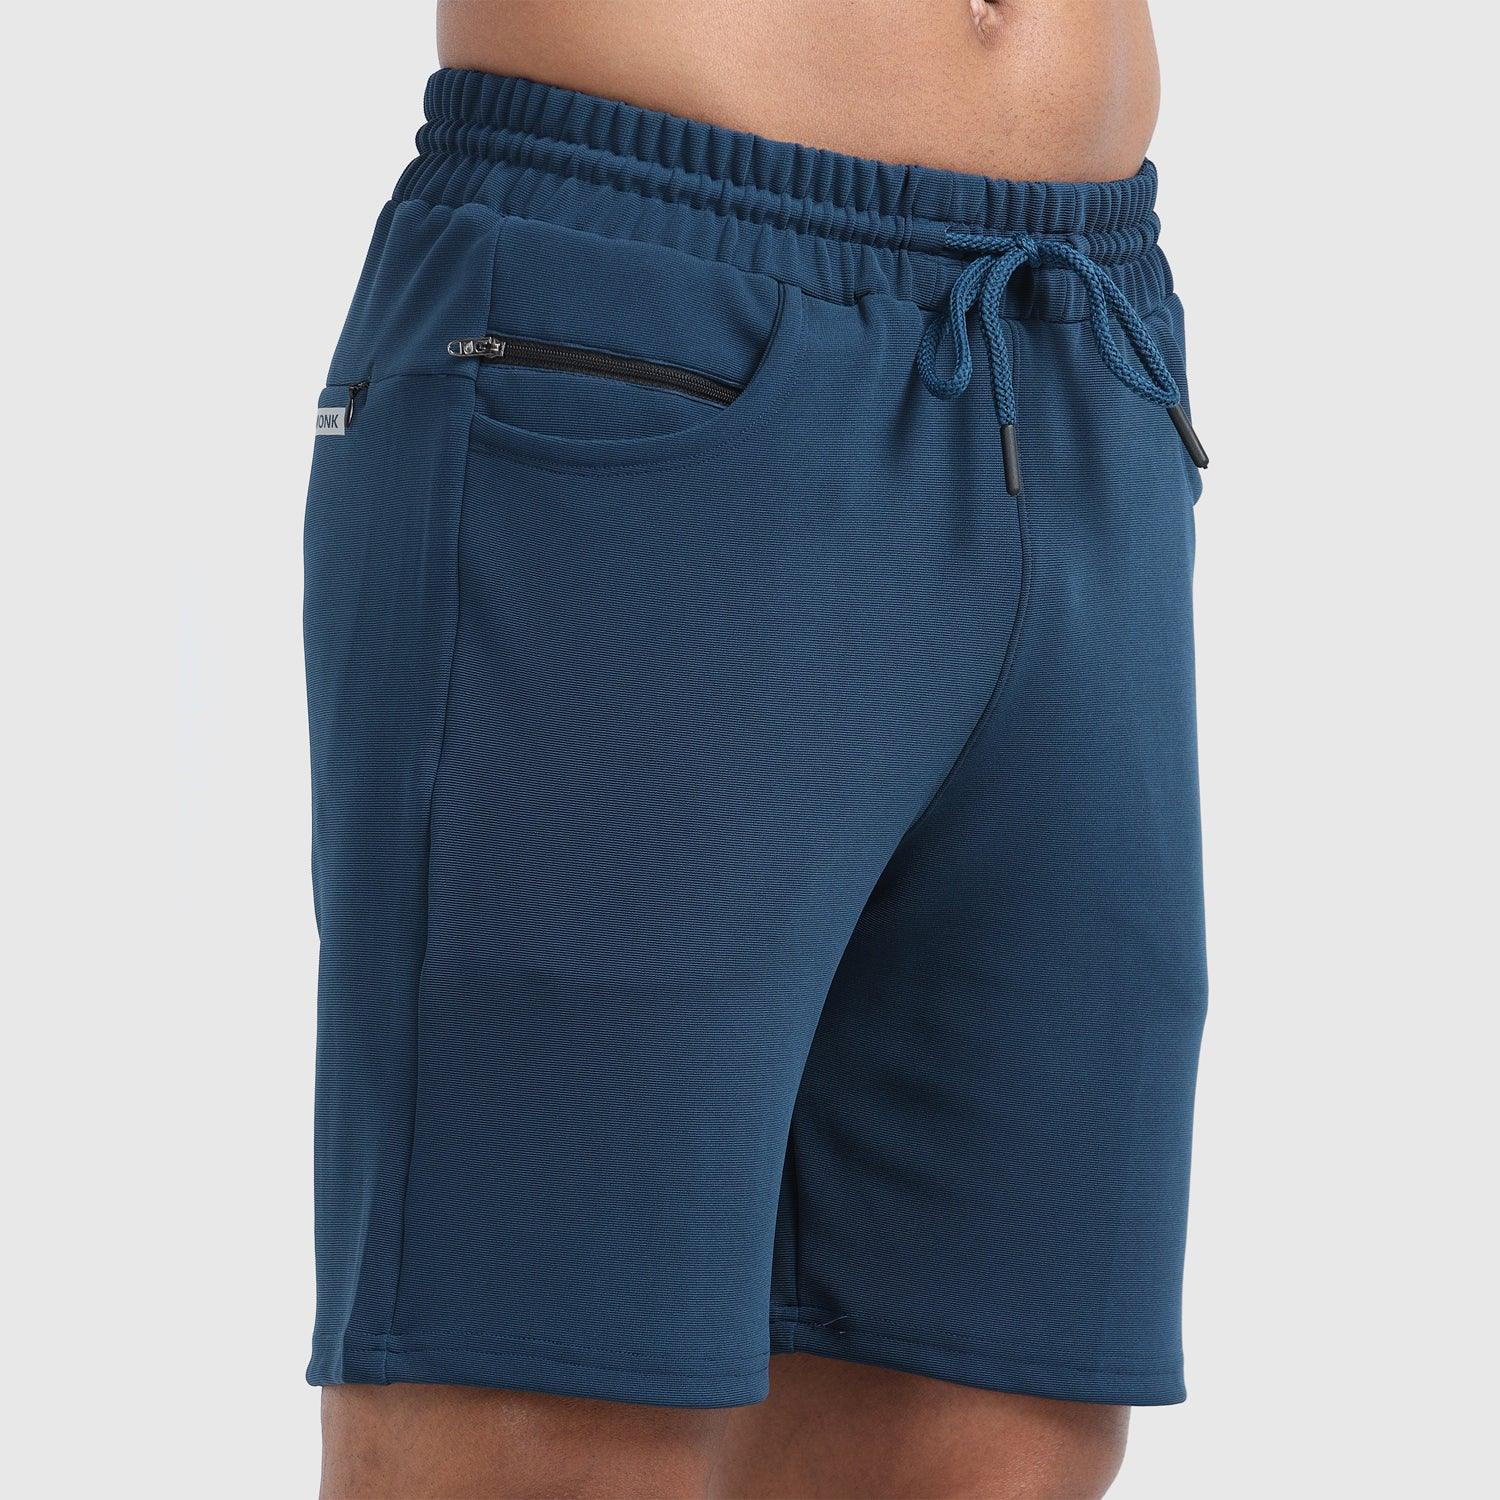 Denmonk's fashionable Retroglide Shorts regal blue shorts for men will boost your level of gym fitness.